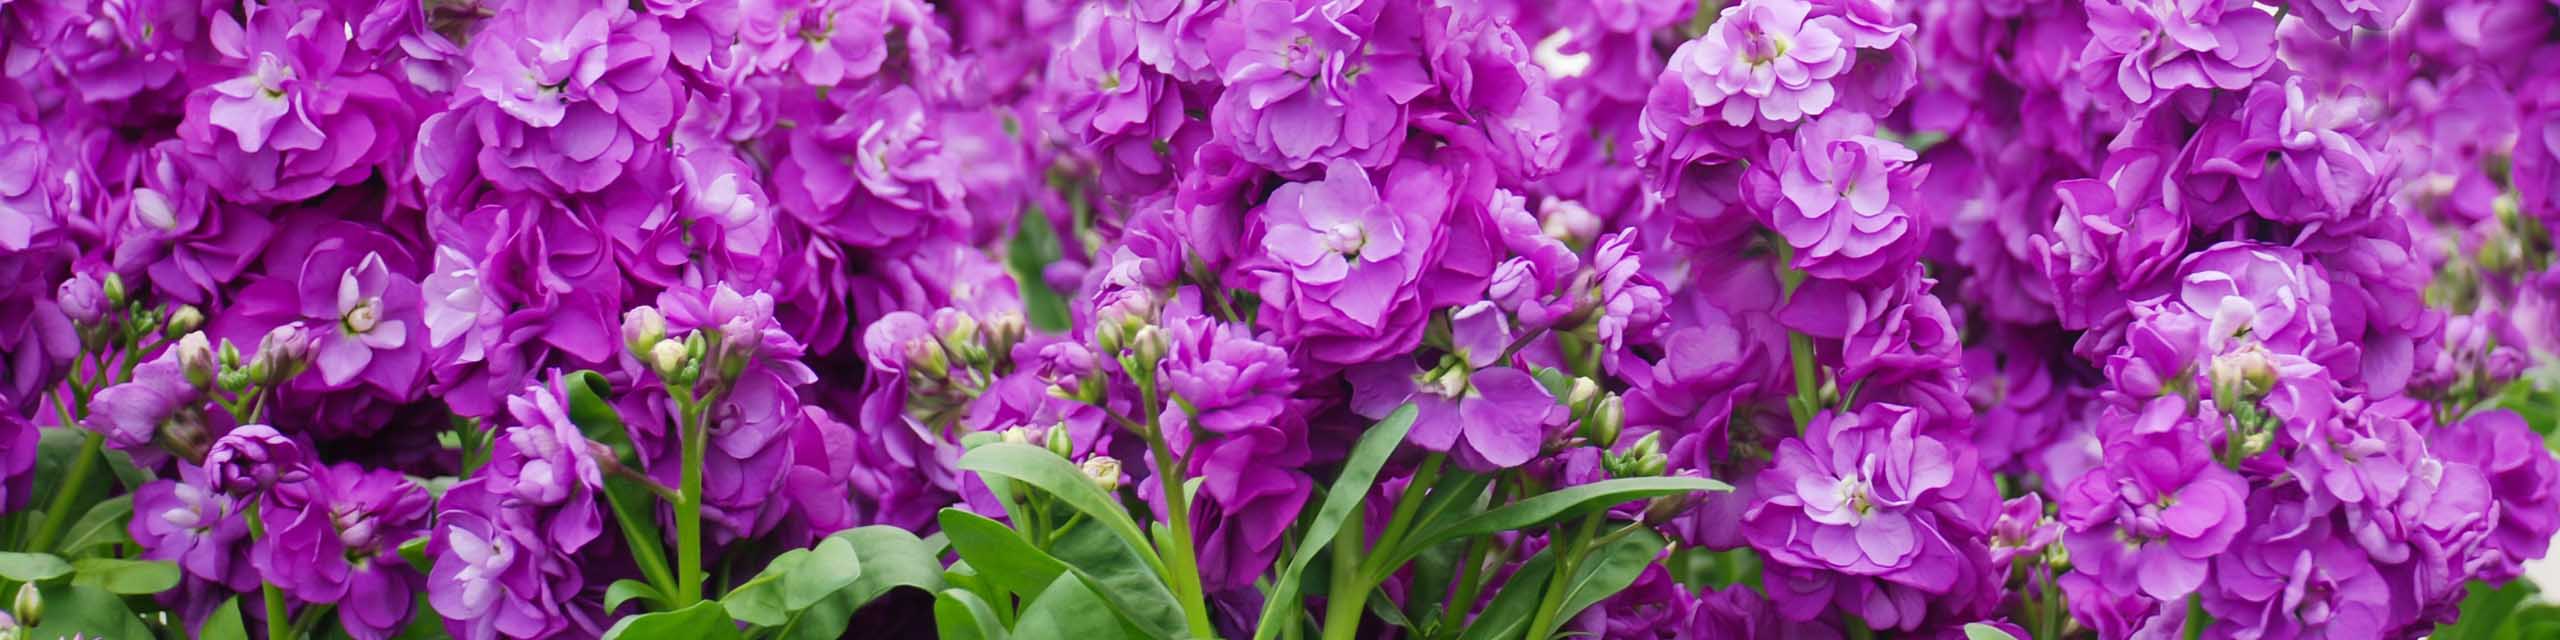 Purple stock flowers (Matthiola Incana) growing in a flower bed.